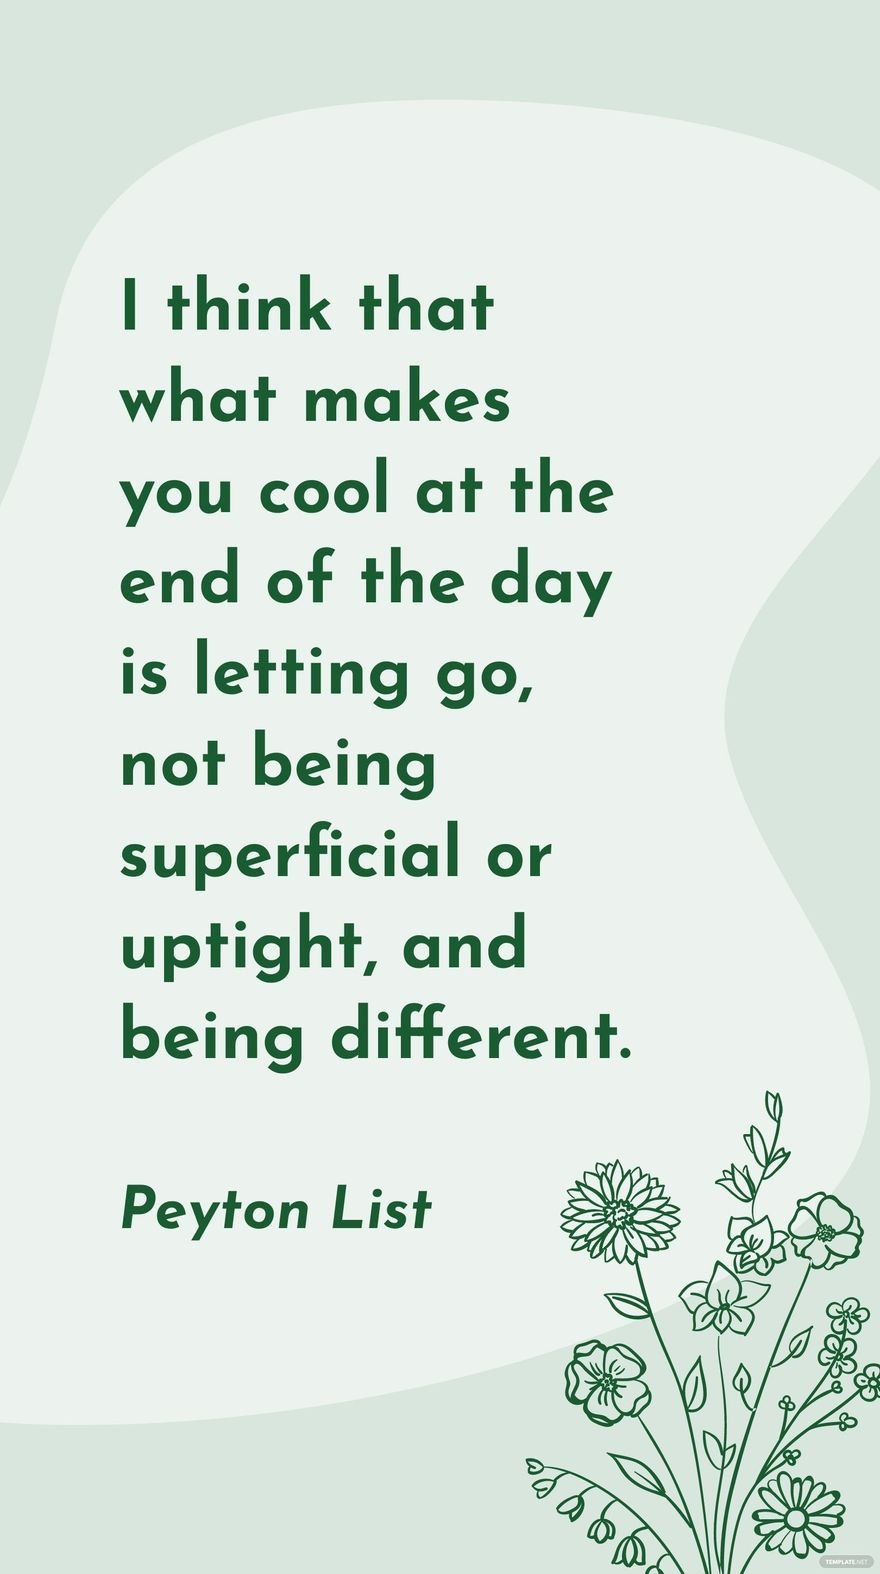 Free Peyton List - I think that what makes you cool at the end of the day is letting go, not being superficial or uptight, and being different. in JPG